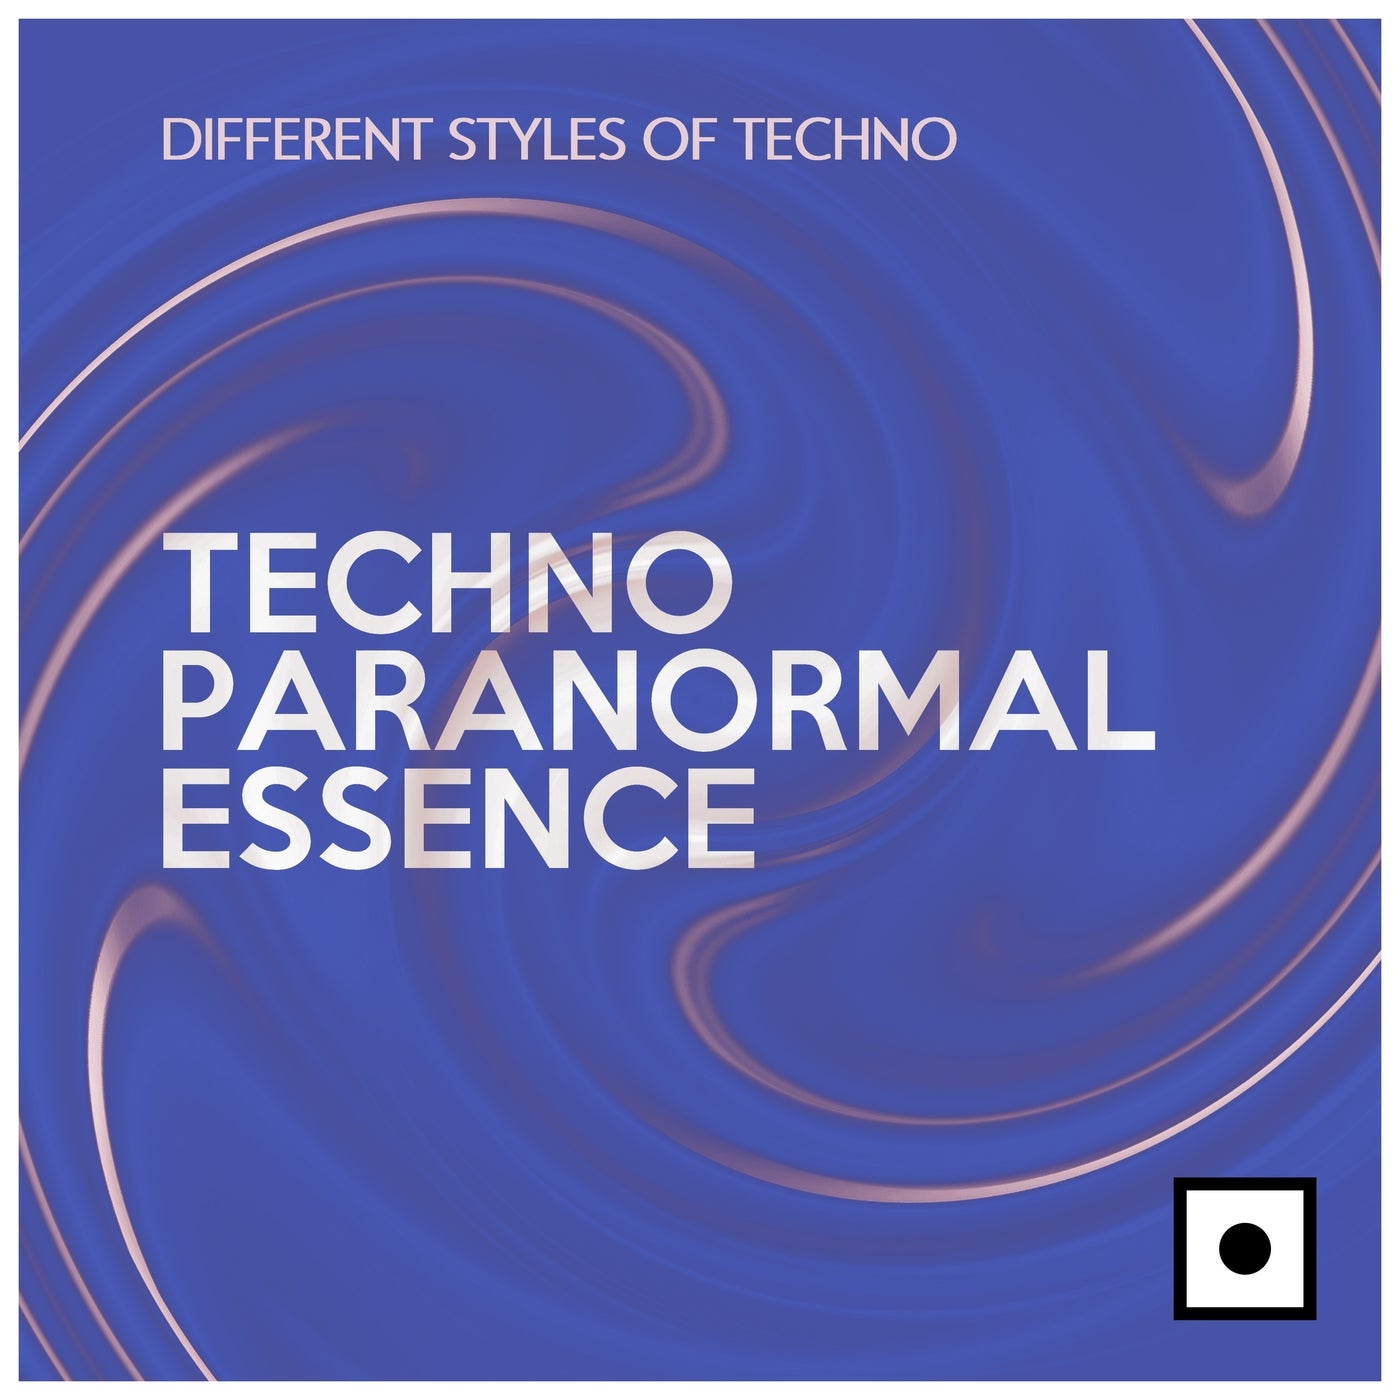 Cesar D' Constanzzo, Daniel Hecke - Techno Paranormal Essence (Different Styles of Techno) [Blackpoint Records]